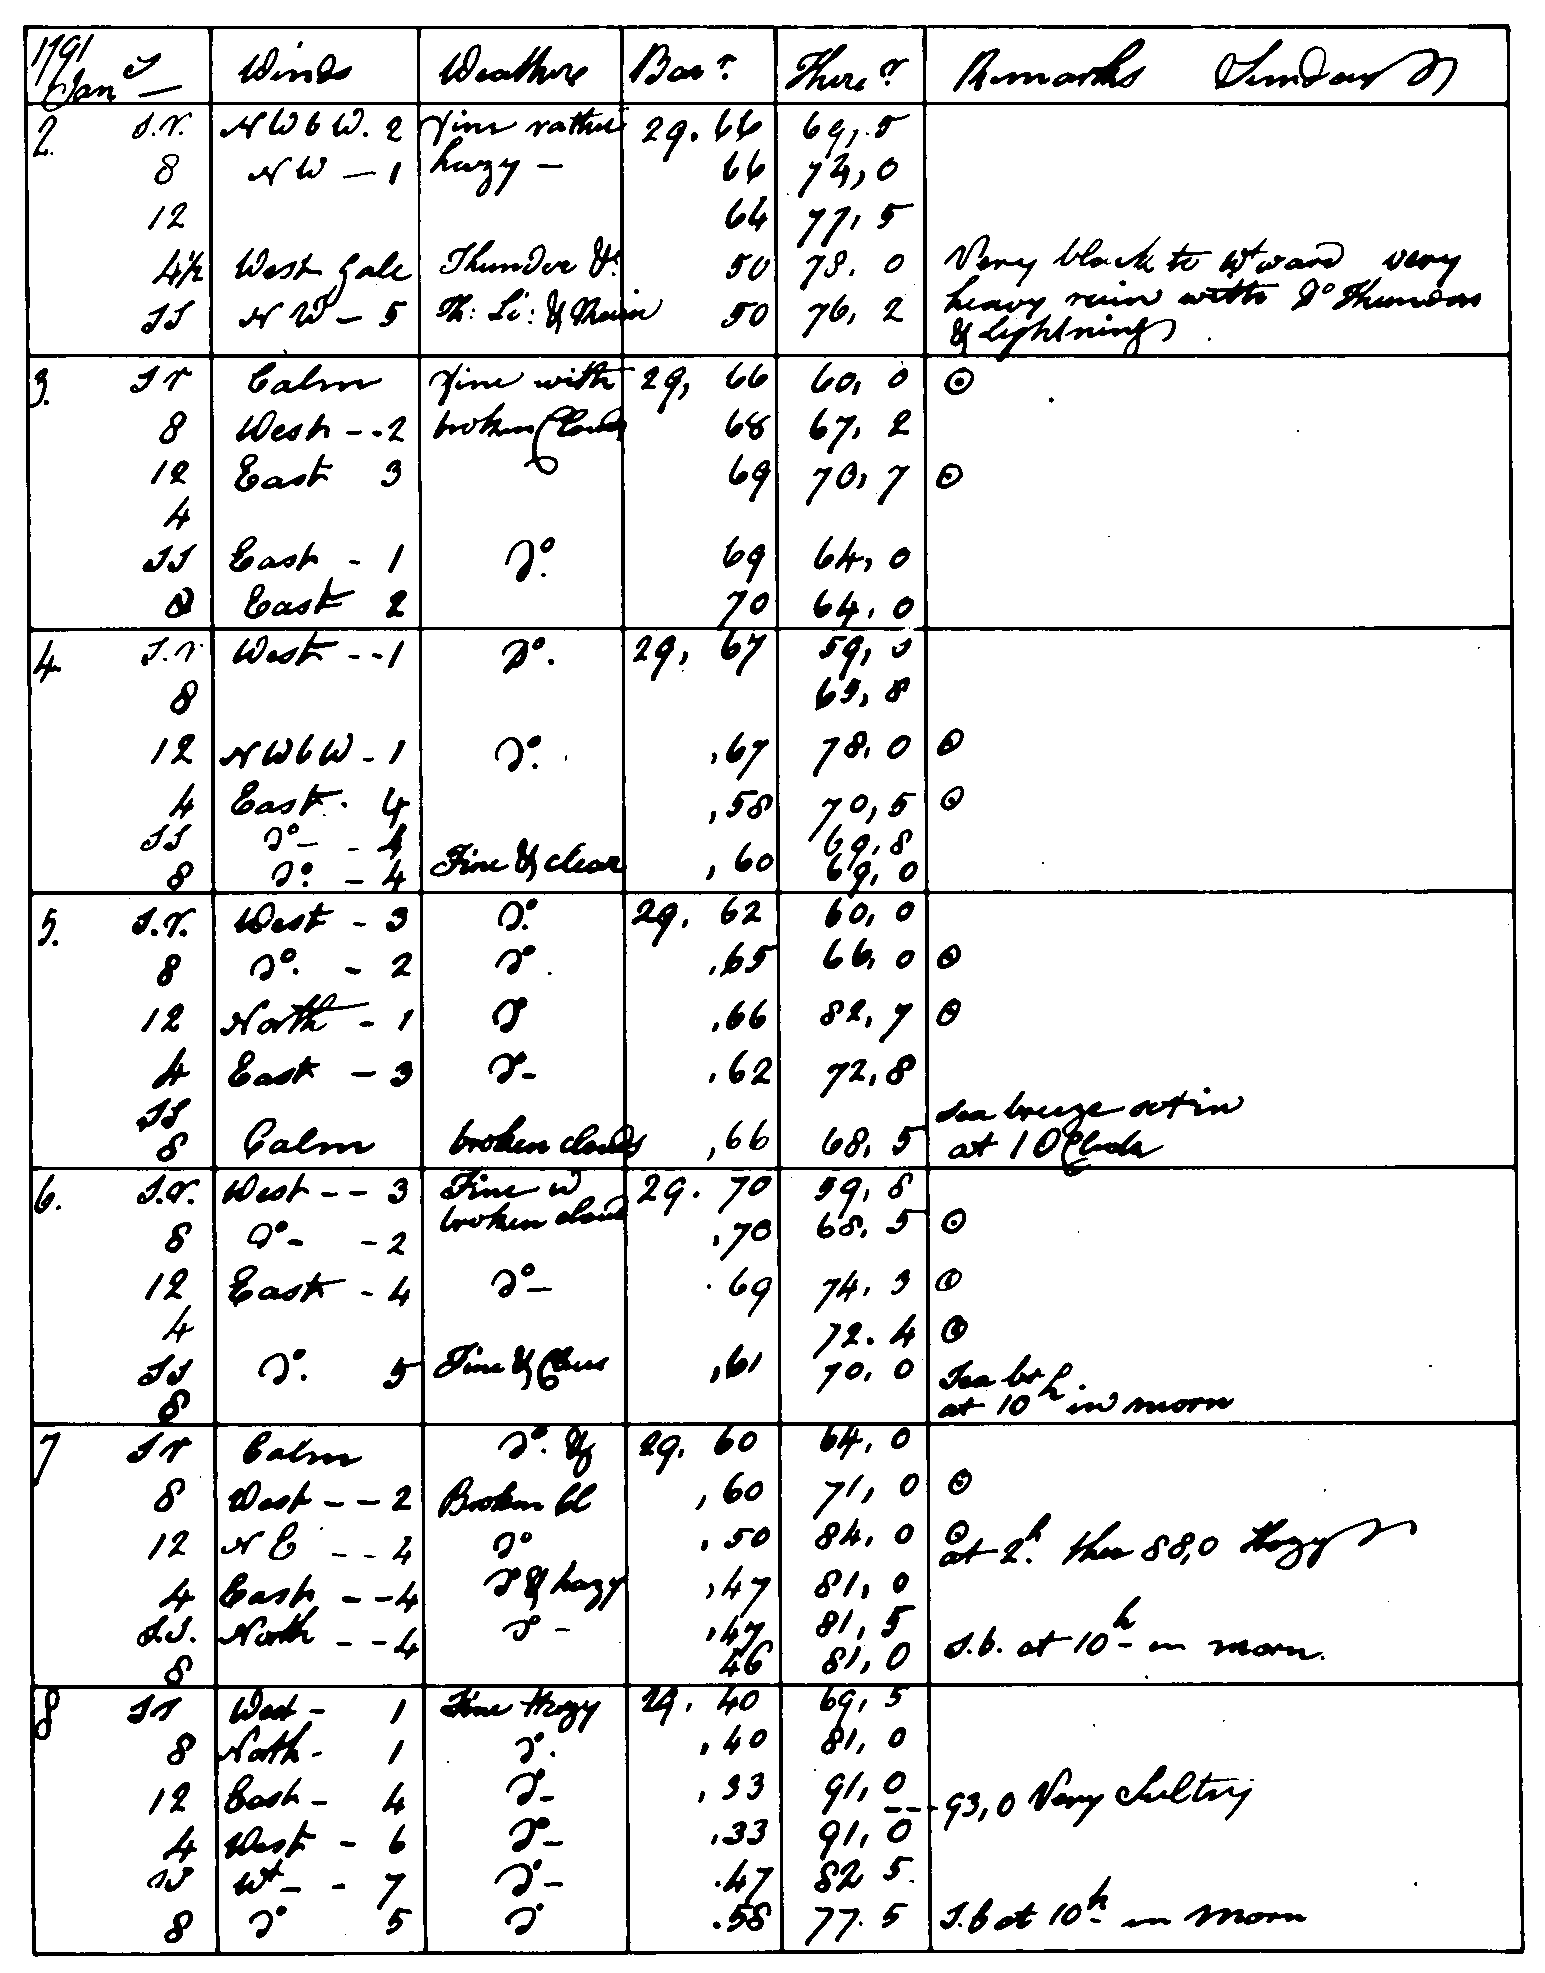 A hand written page from the Meteorological Journal of William Dawes.